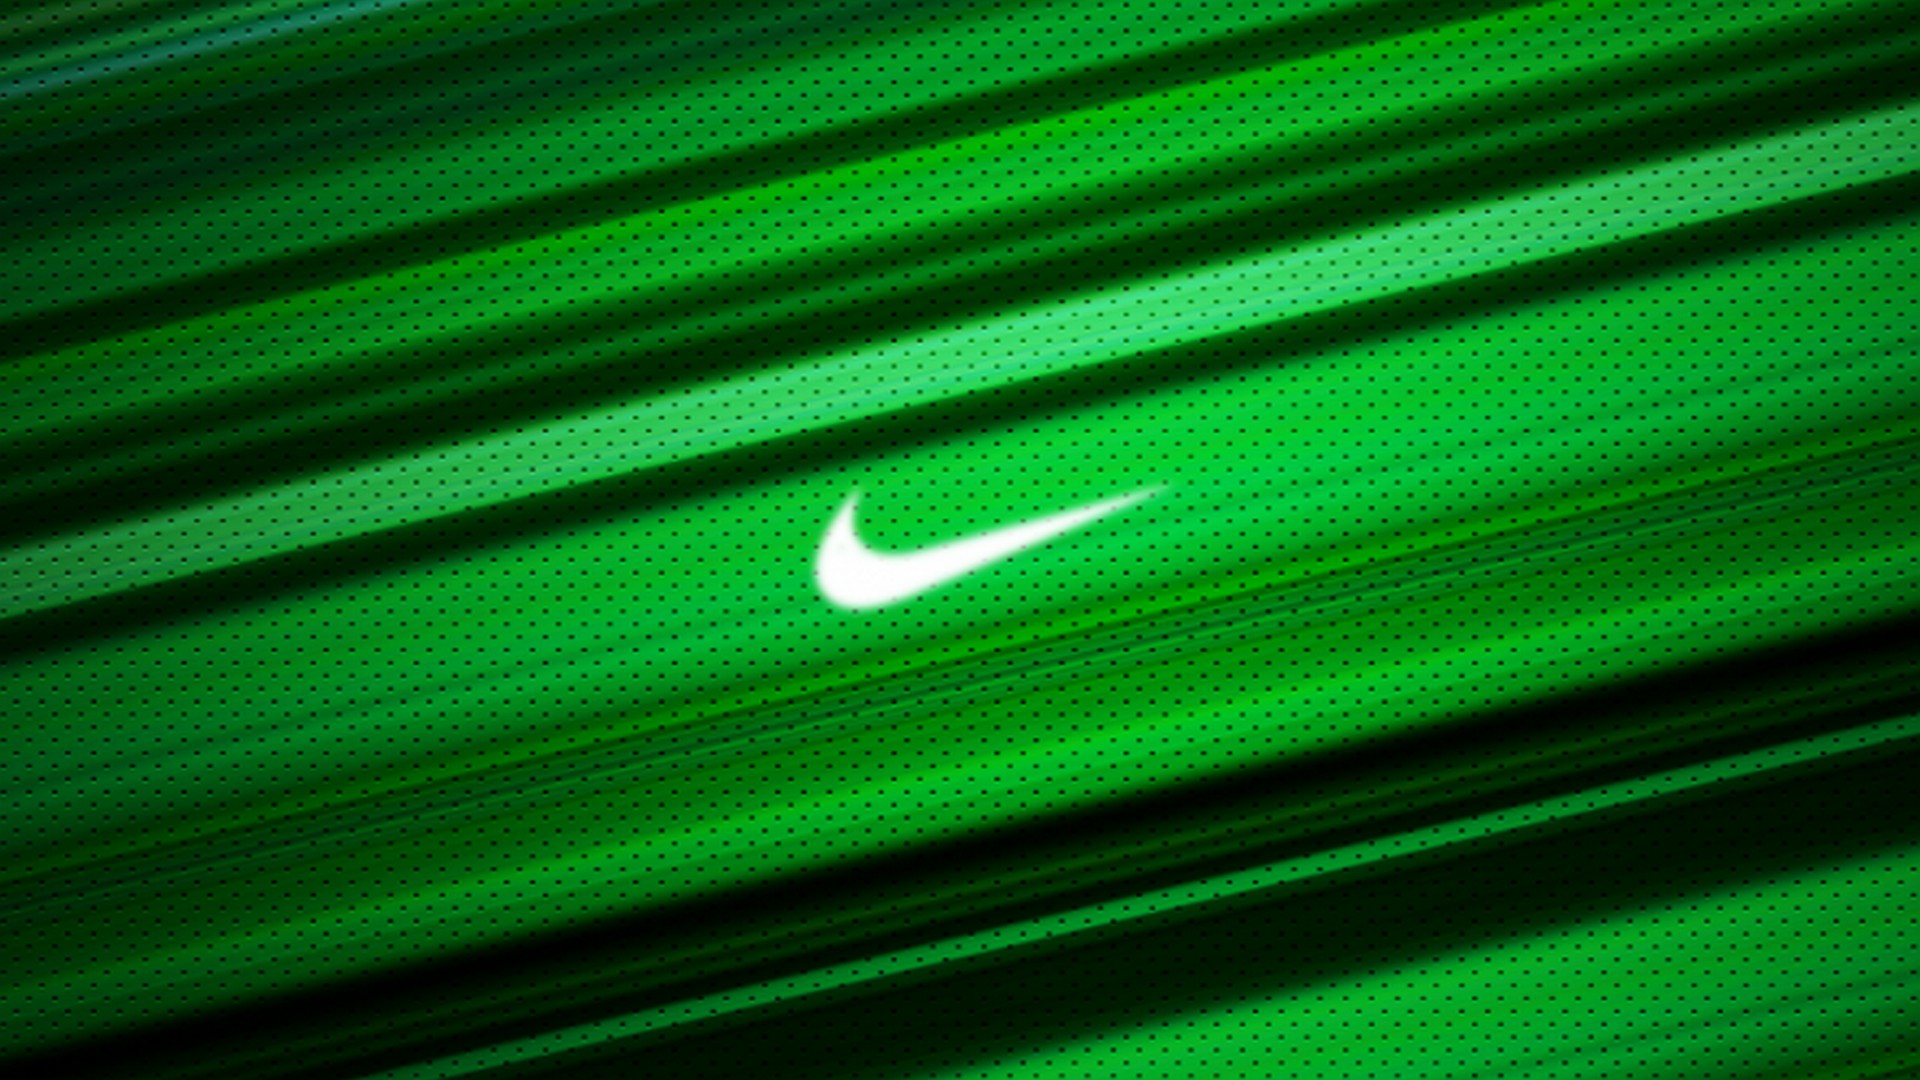 Neon Green HD Backgrounds with image resolution 1920x1080 pixel. You can make this wallpaper for your Desktop Computer Backgrounds, Mac Wallpapers, Android Lock screen or iPhone Screensavers